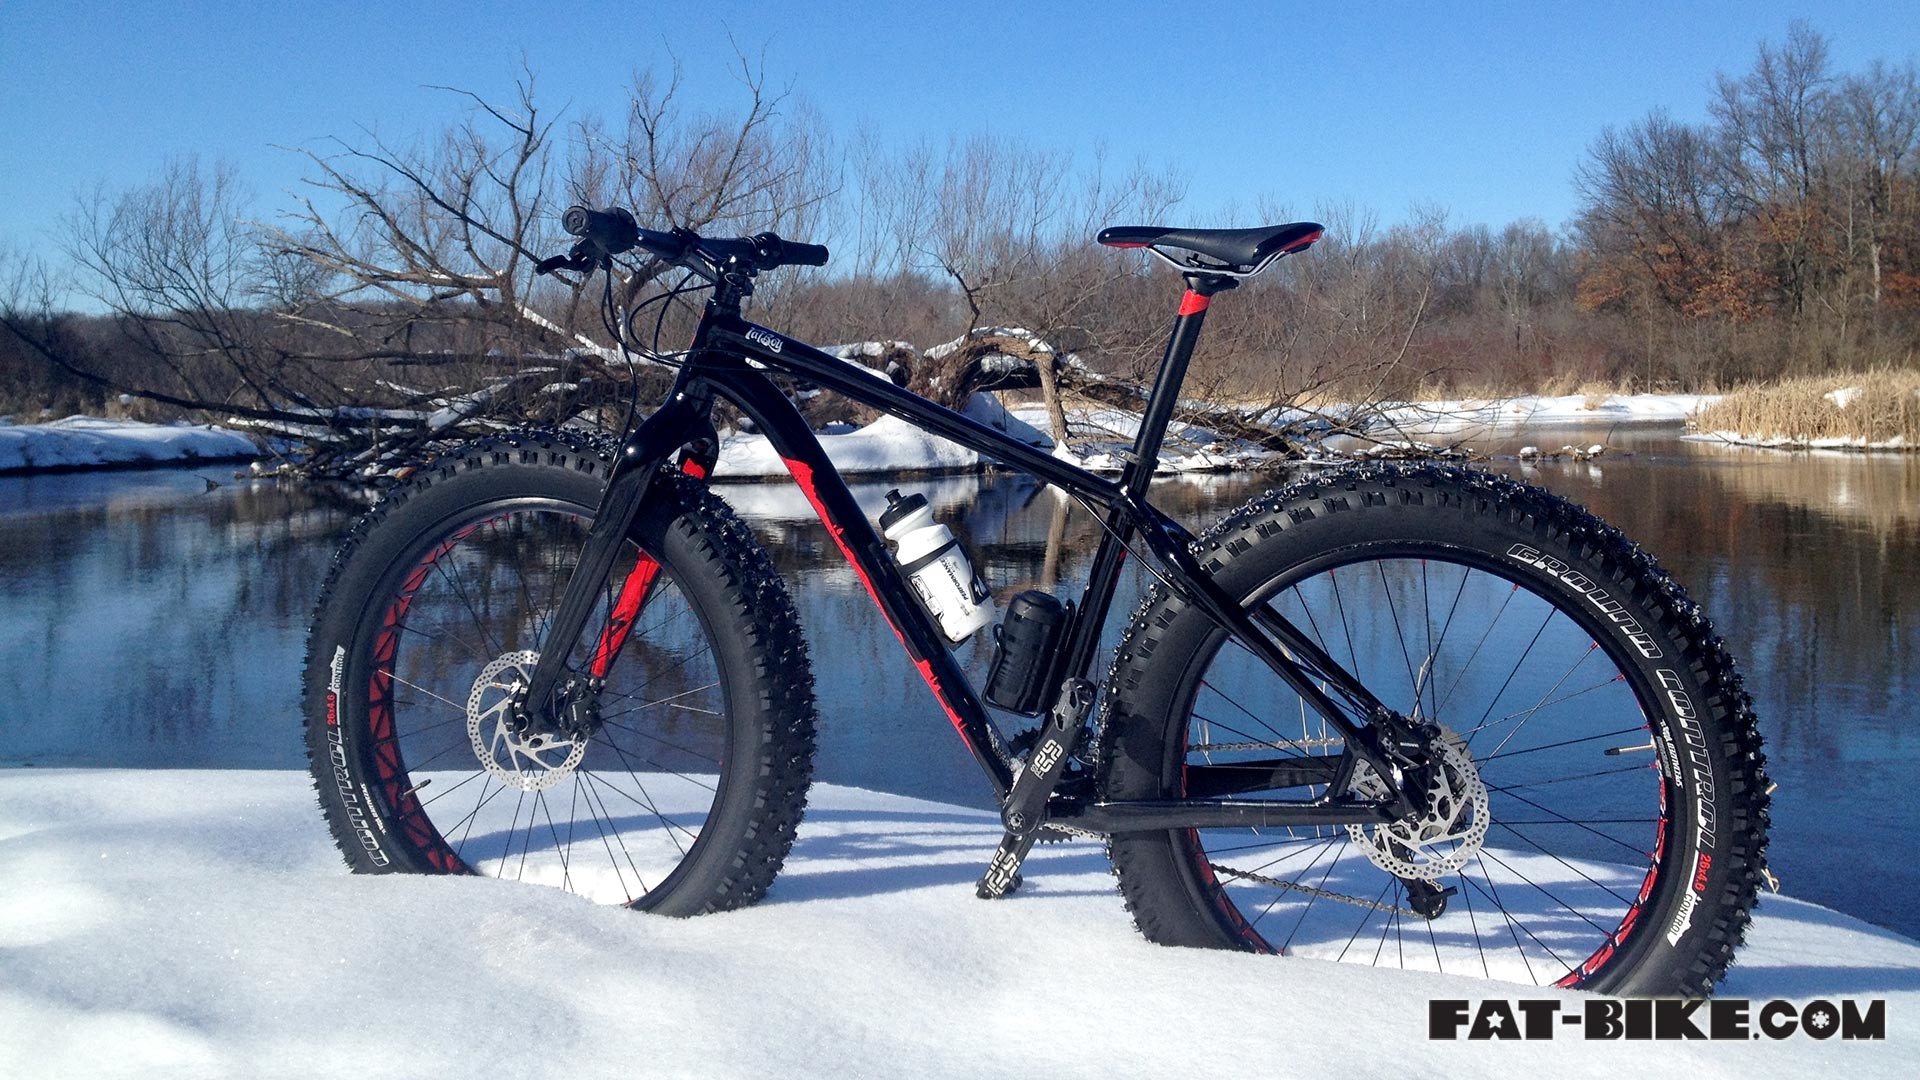 1920x1080 Wallpaper Wednesday – Fatboy in the Snow | FAT-BIKE.COM